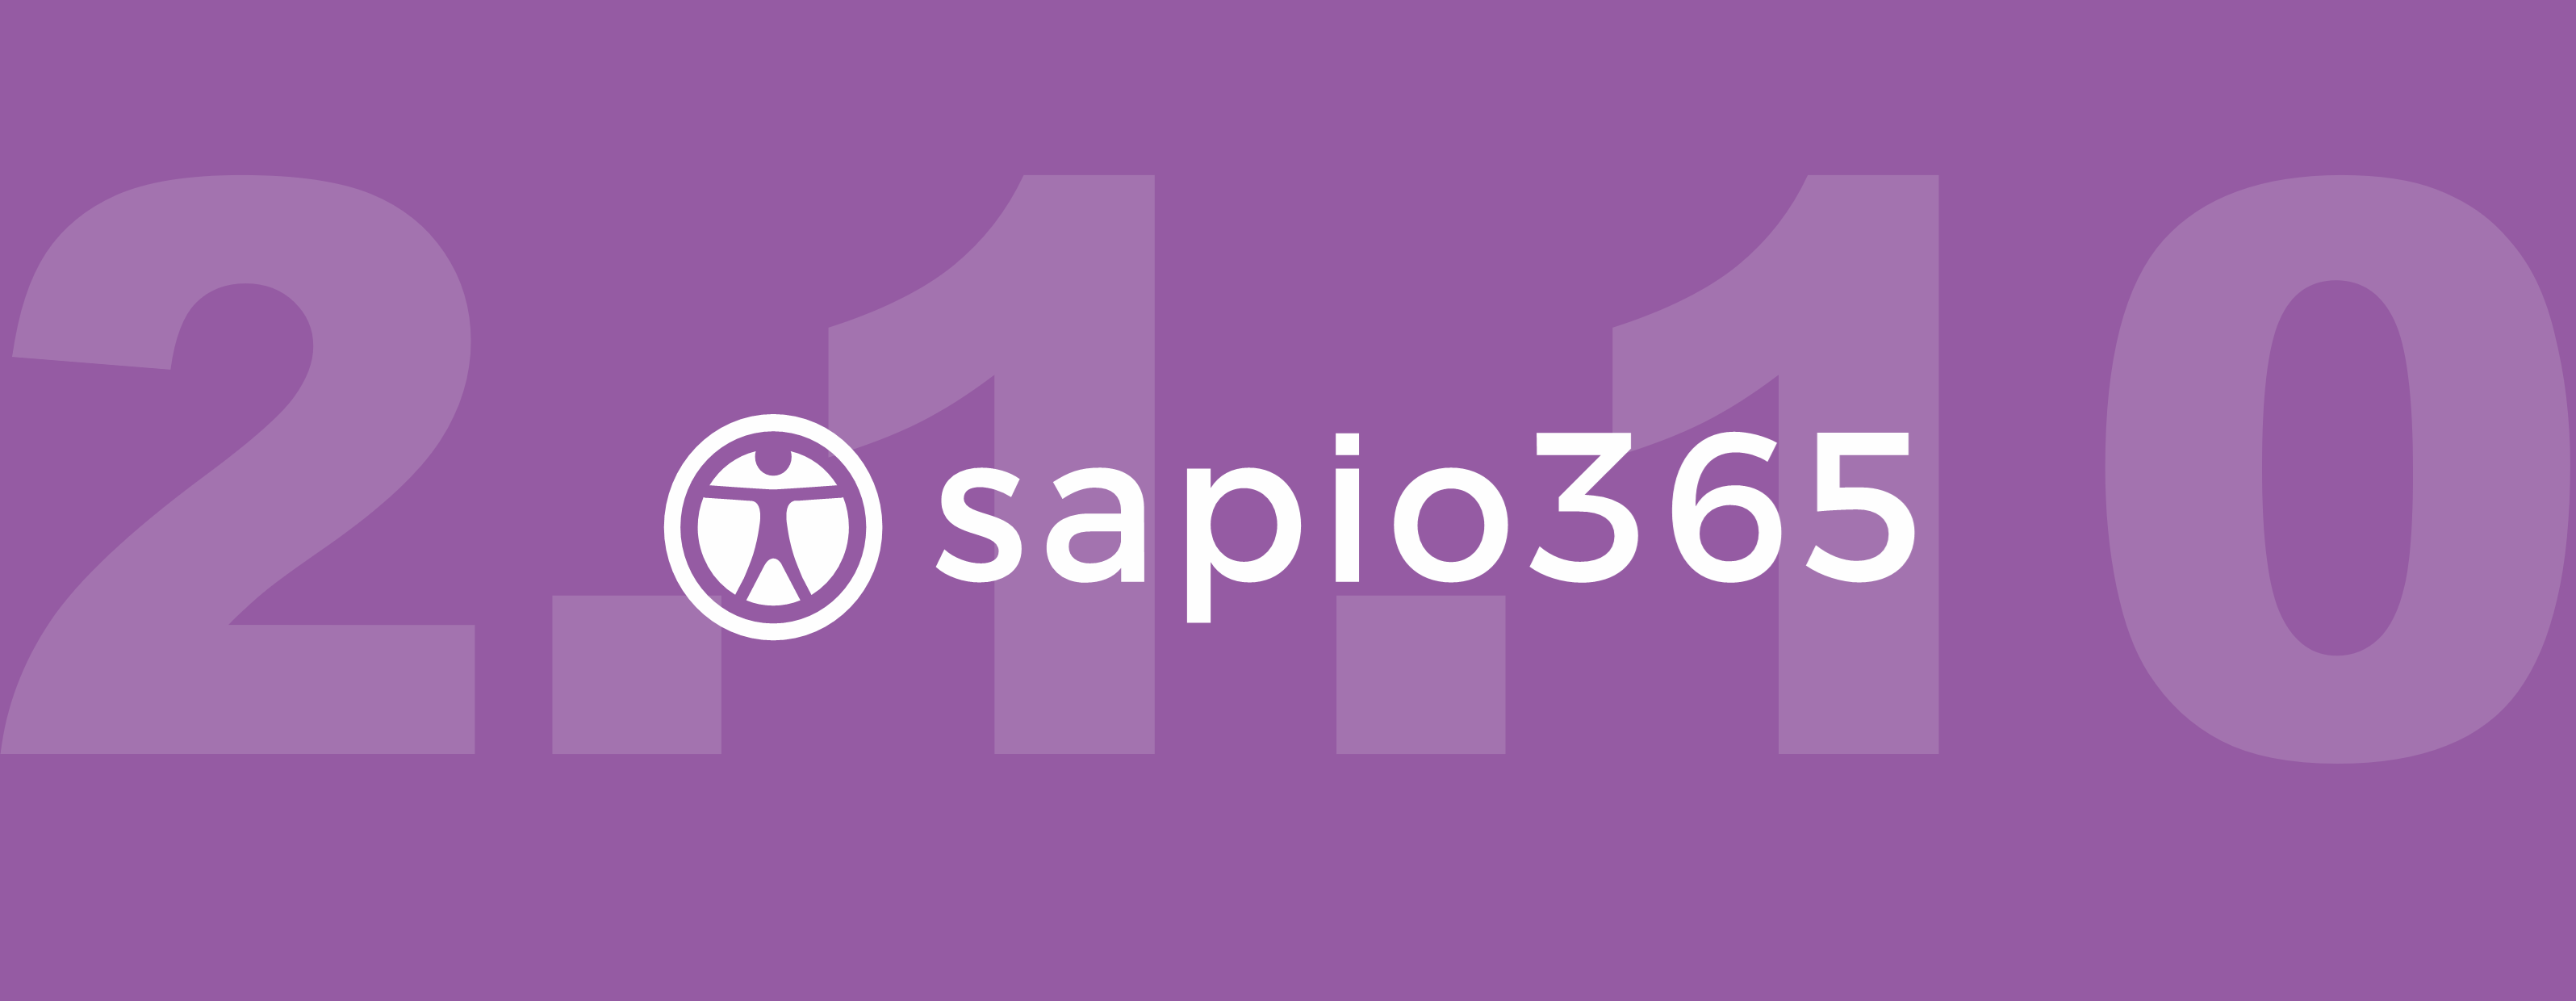 Gain better control of your Microsoft 365 environment with sapio365 to manage Teams channels, chats, onboarding and offboarding users and more!